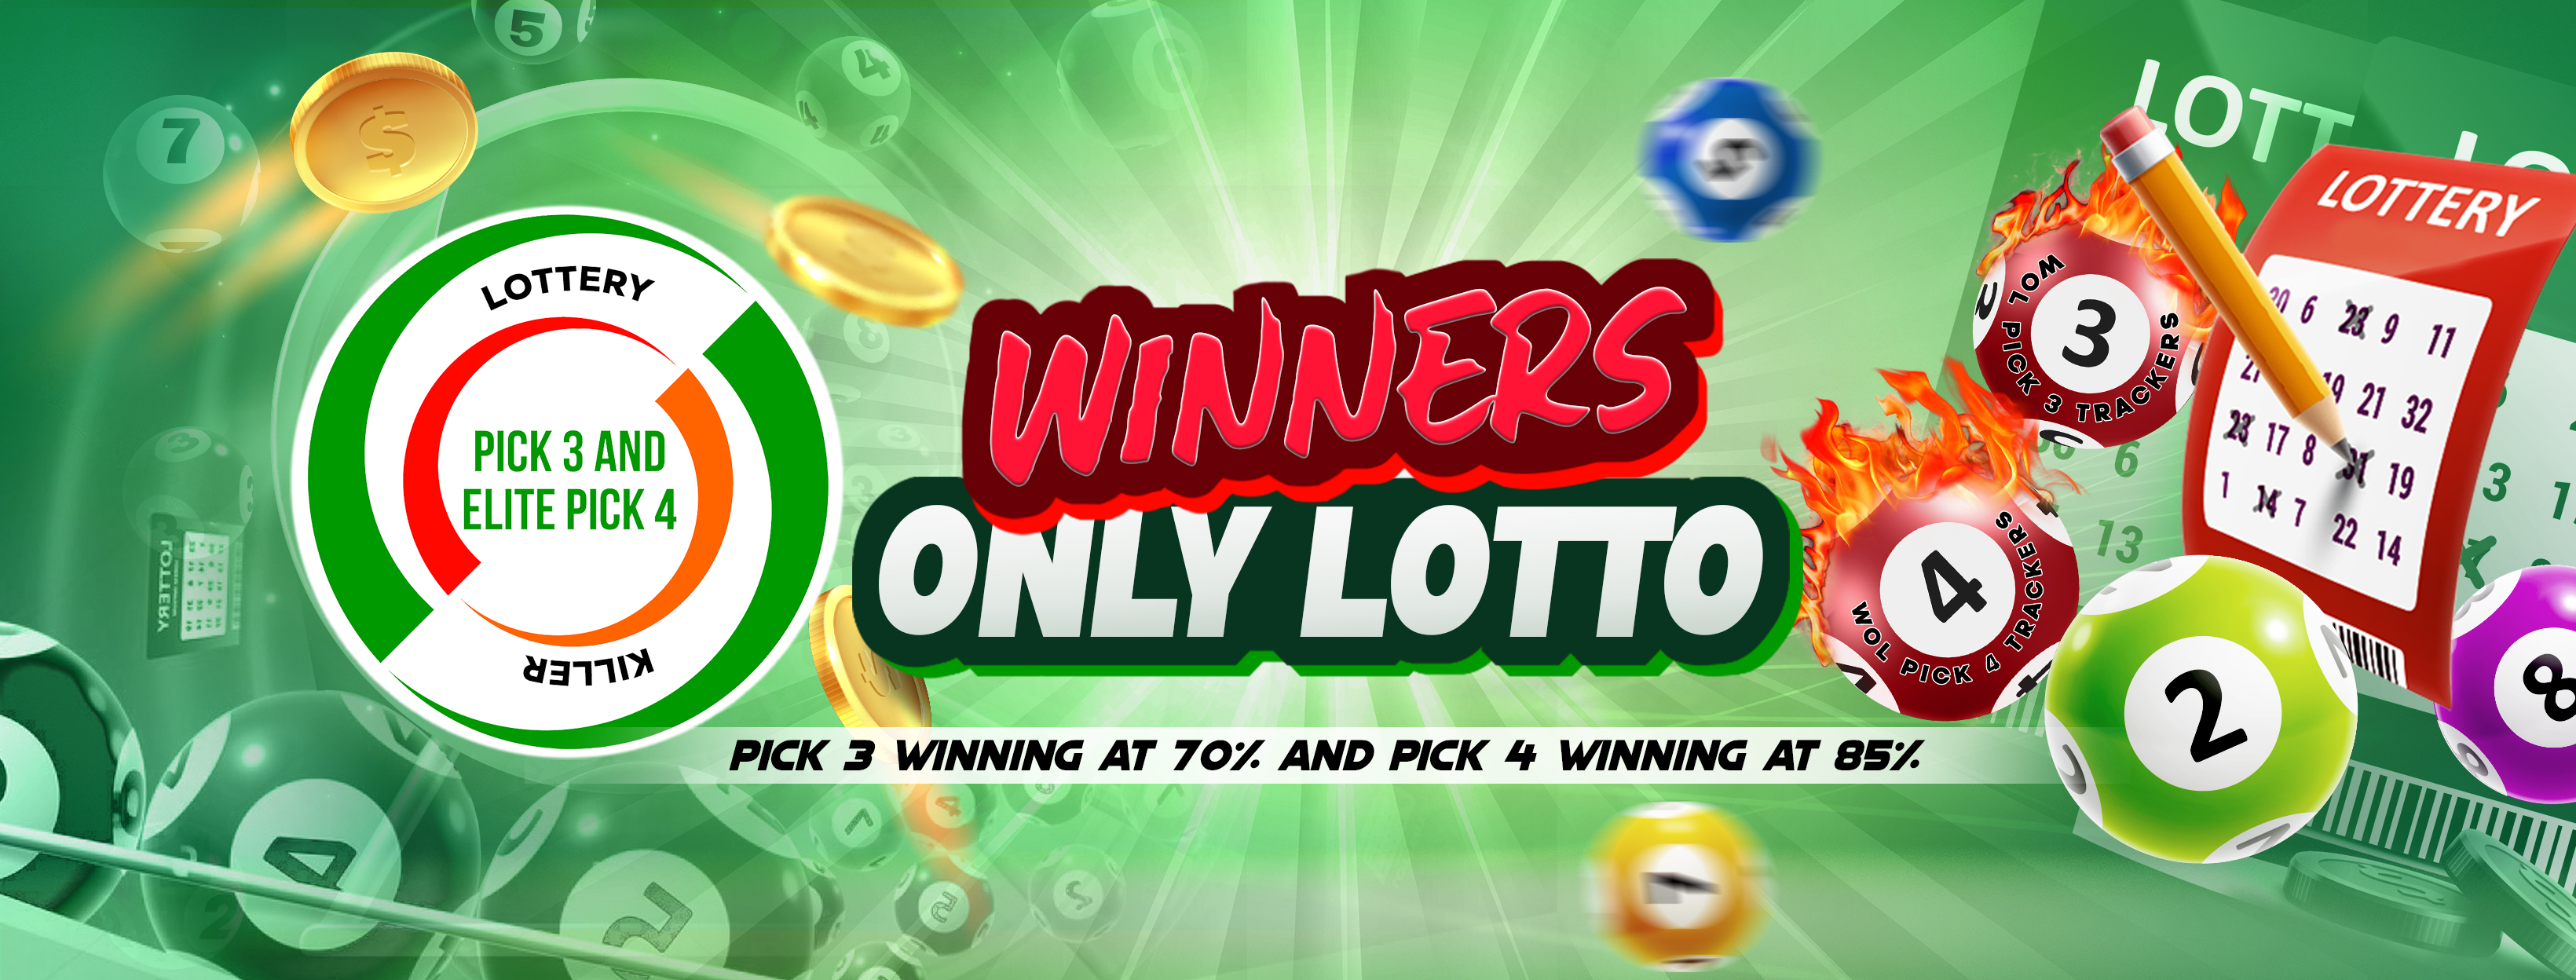 Winners Only Lotto Affiliates - Affiliate Program